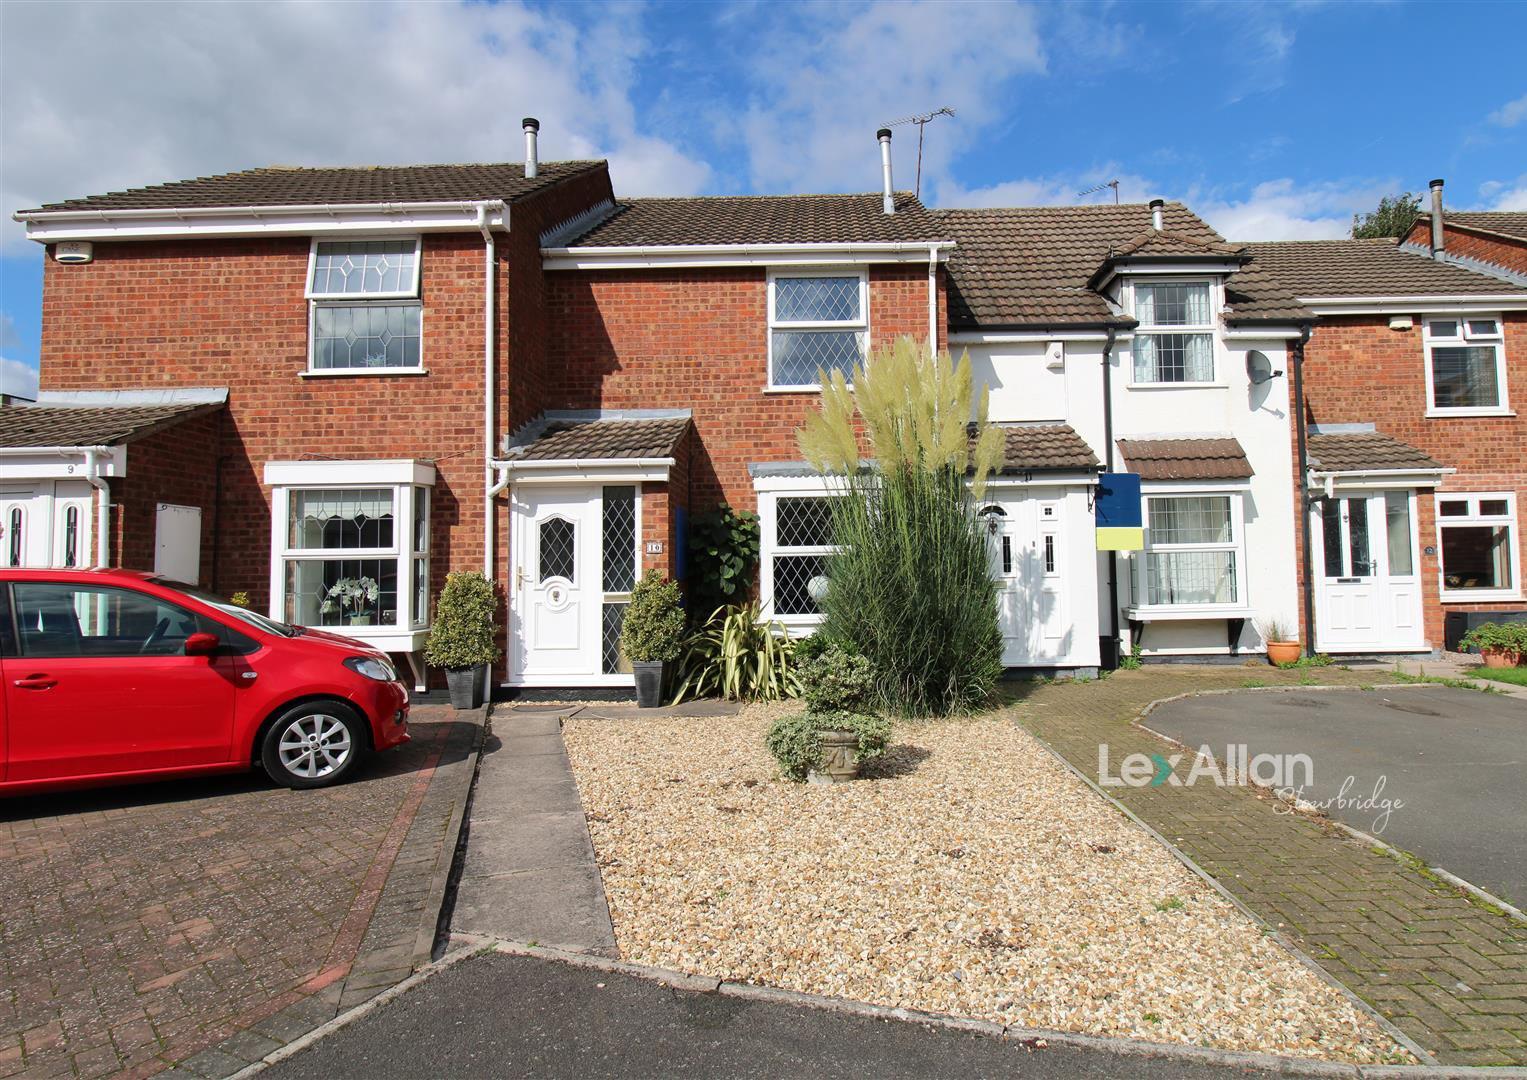 2 bed terraced house for sale in Monkswell Close, Brierley Hill, DY5 